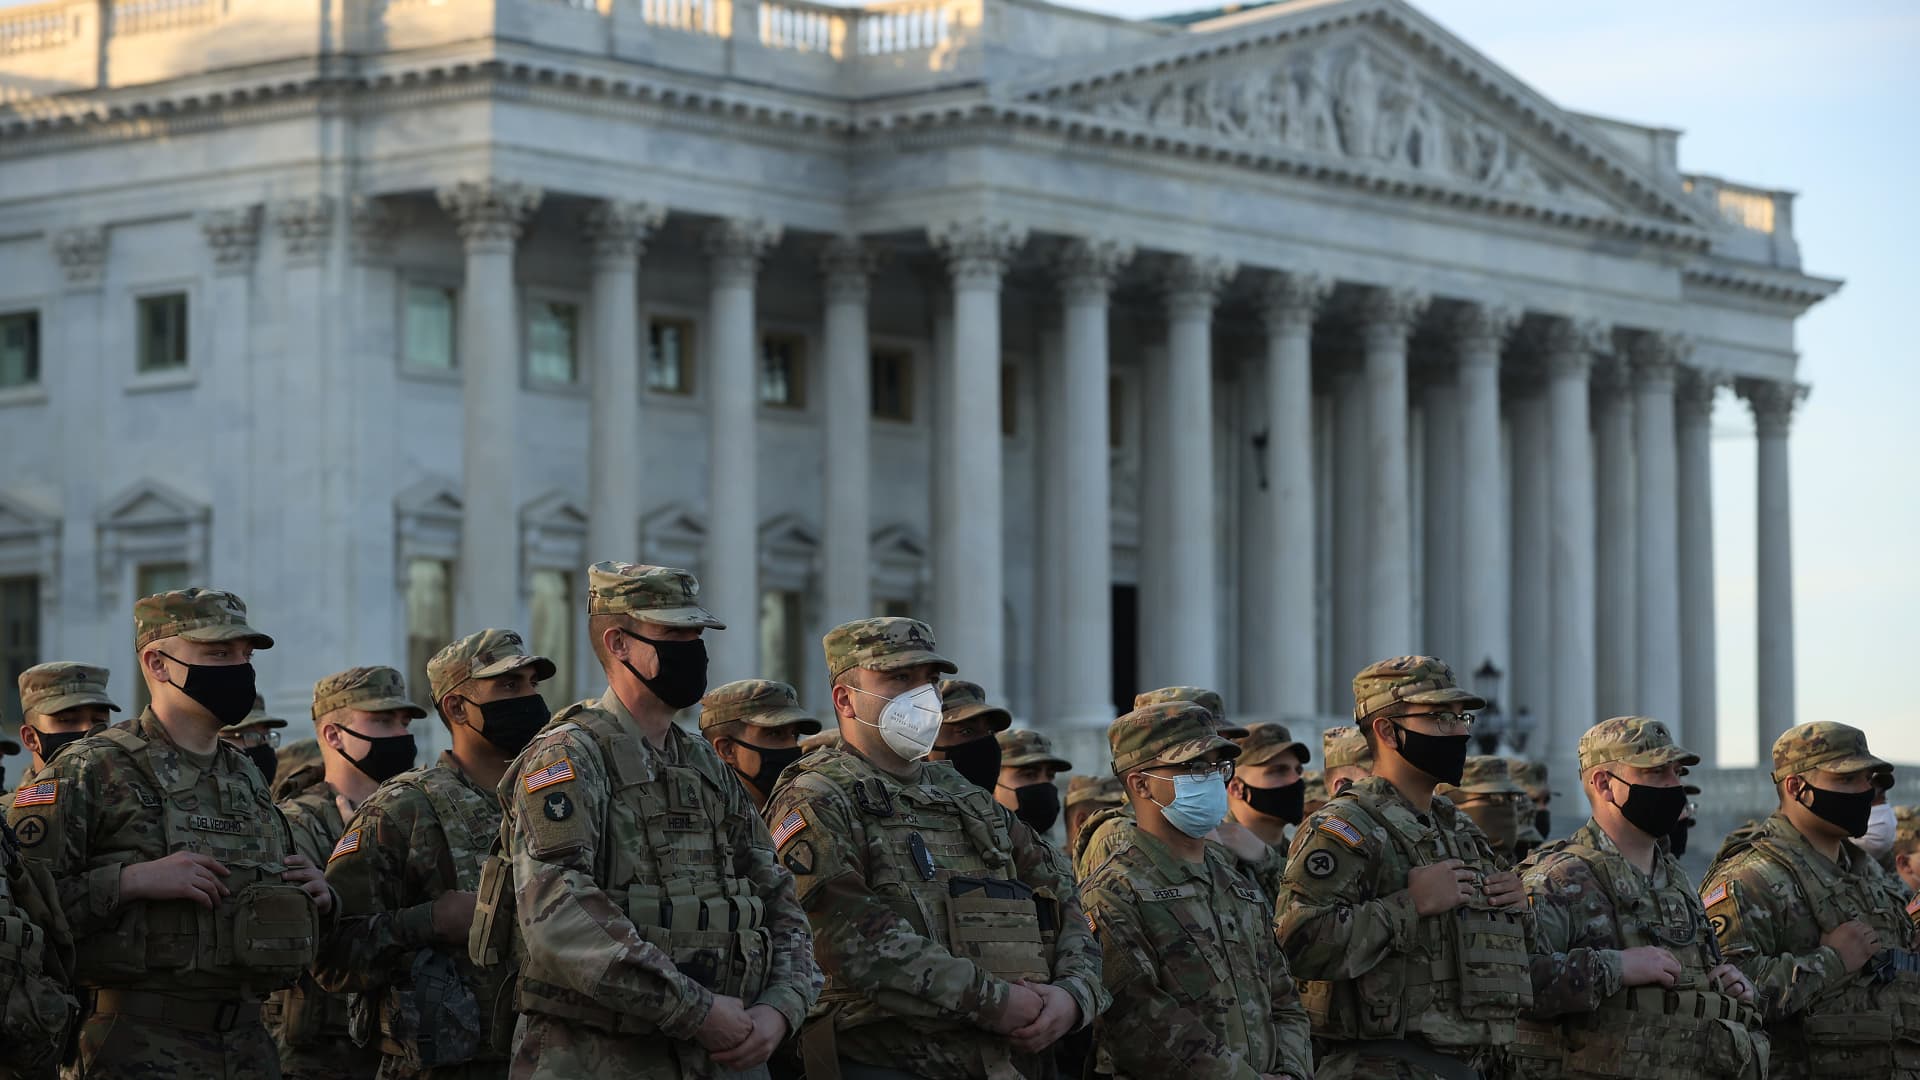 National Guard troops pose for photographers on the East Front of the U.S. Capitol the day after the House of Representatives voted to impeach President Donald Trump for the second time January 14, 2021 in Washington, DC.